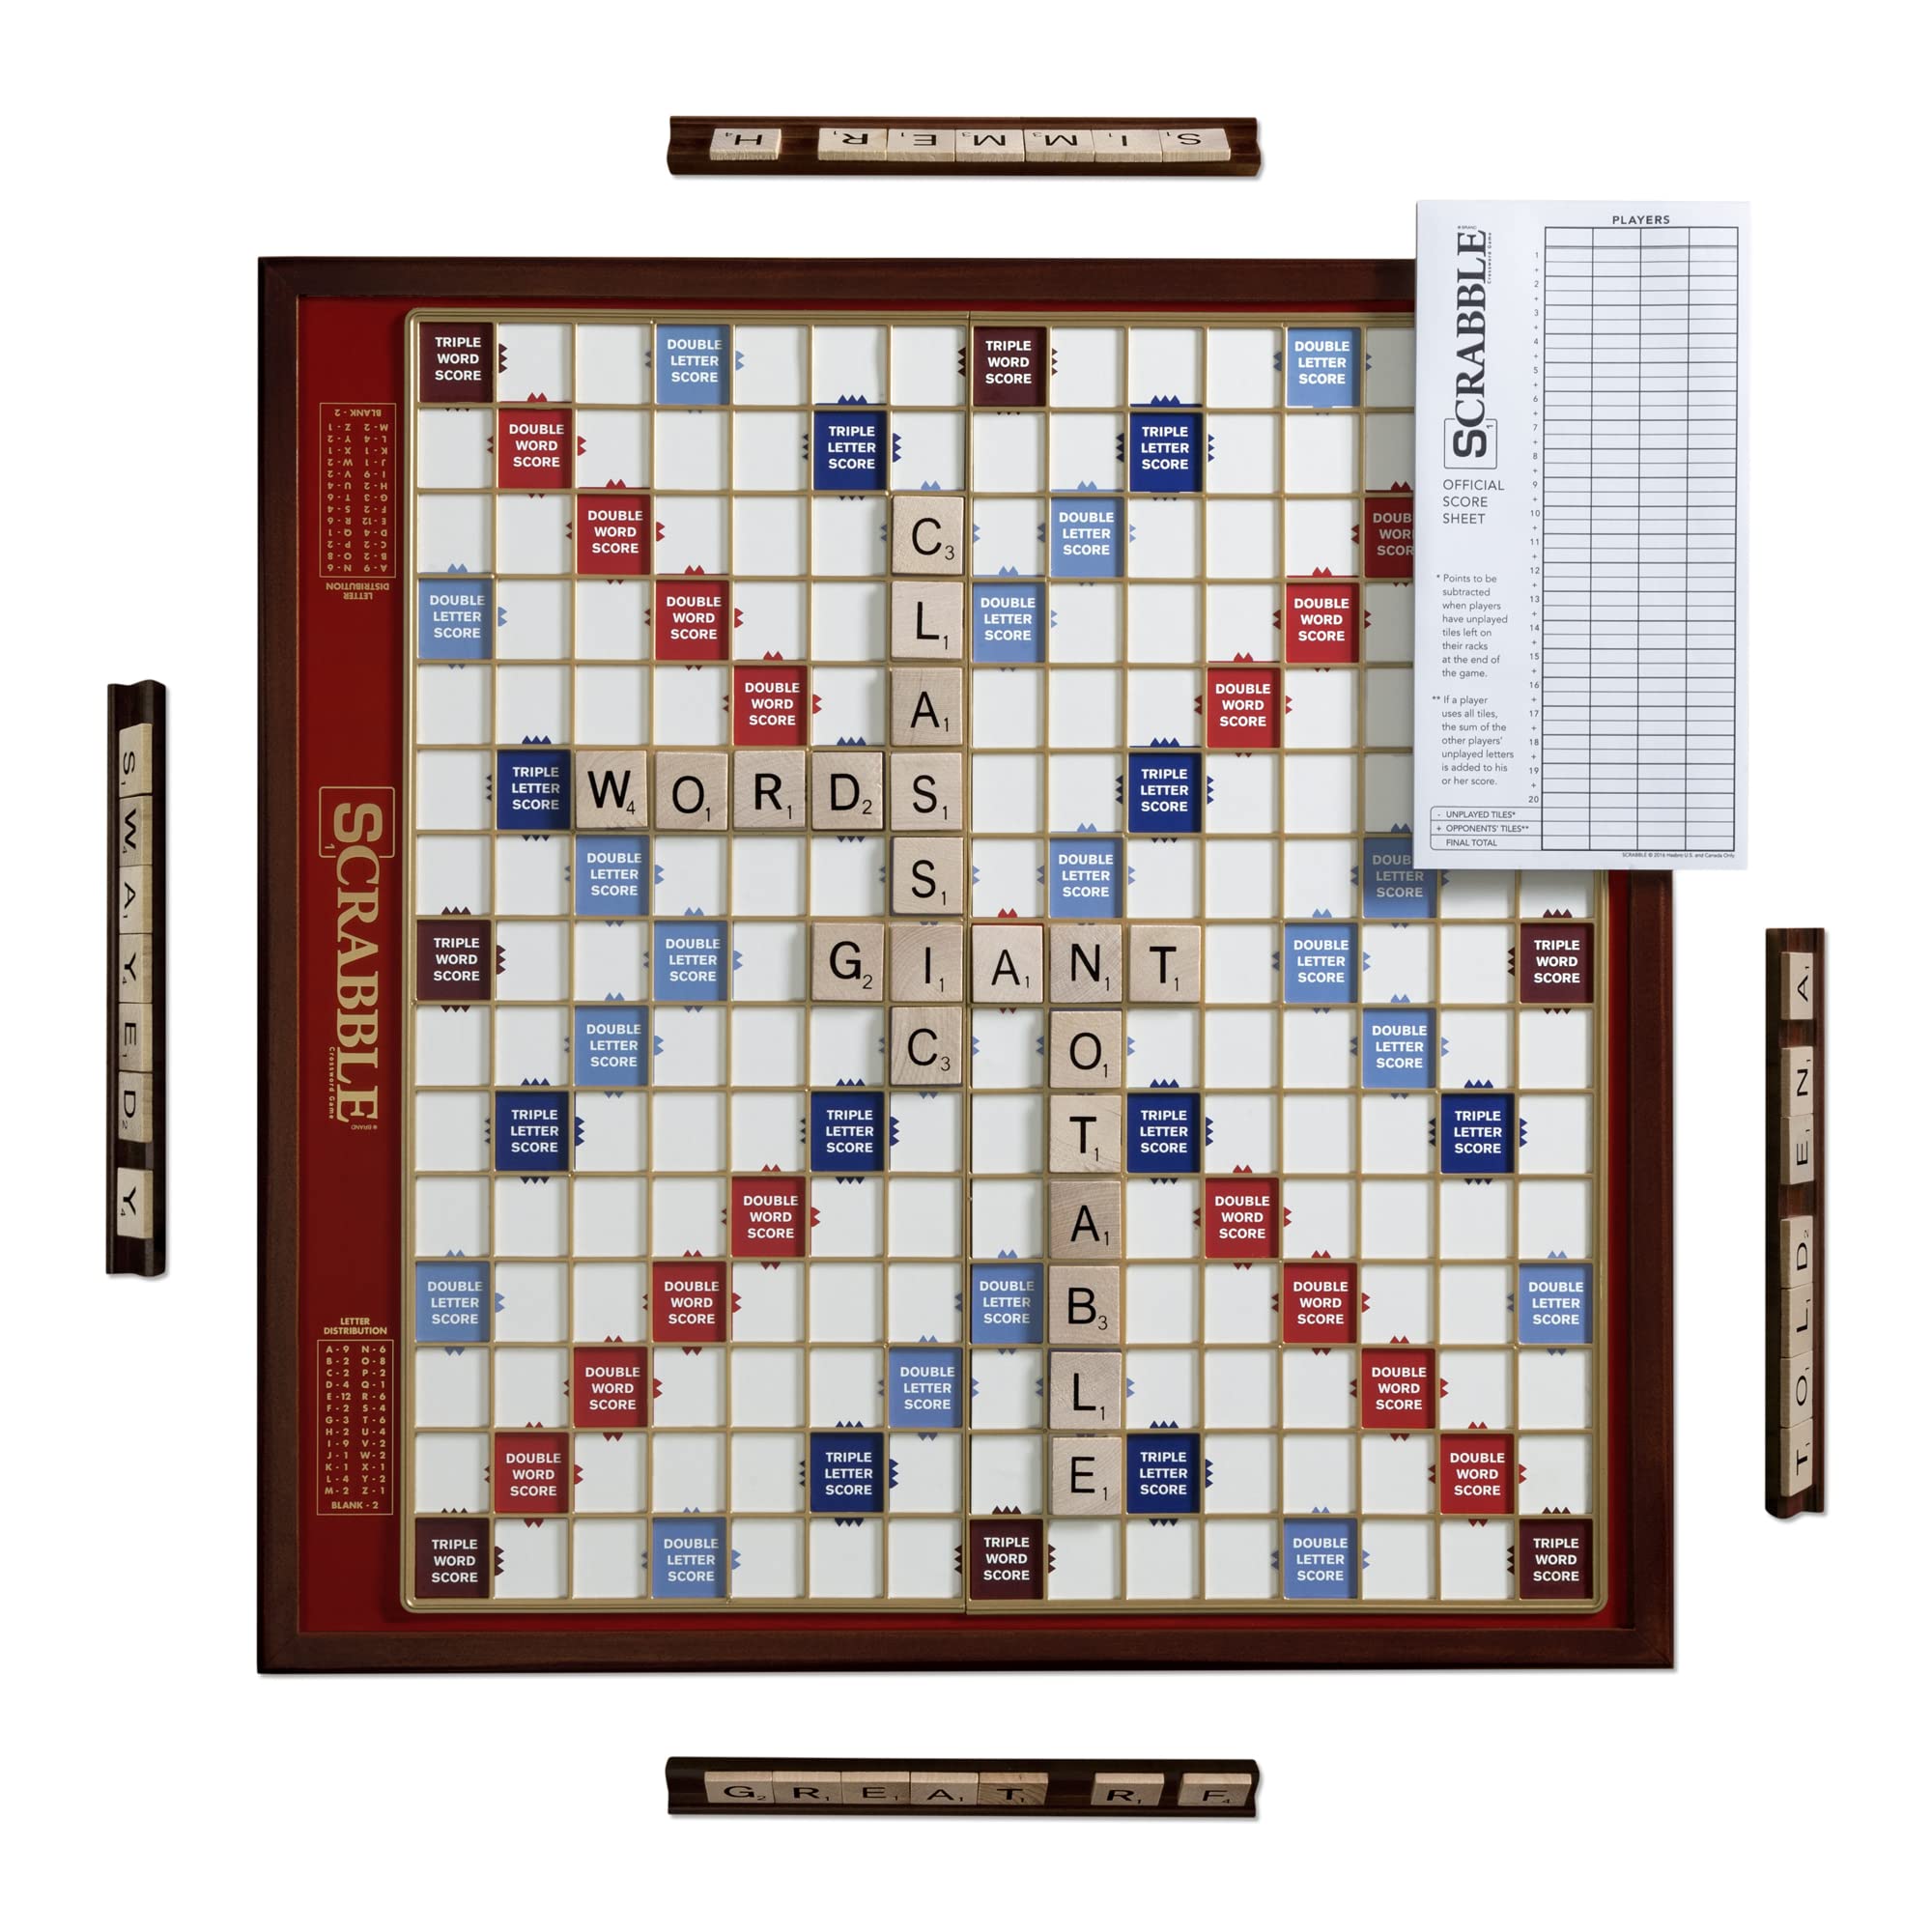 Scrabble board with the word 'EXED' formed